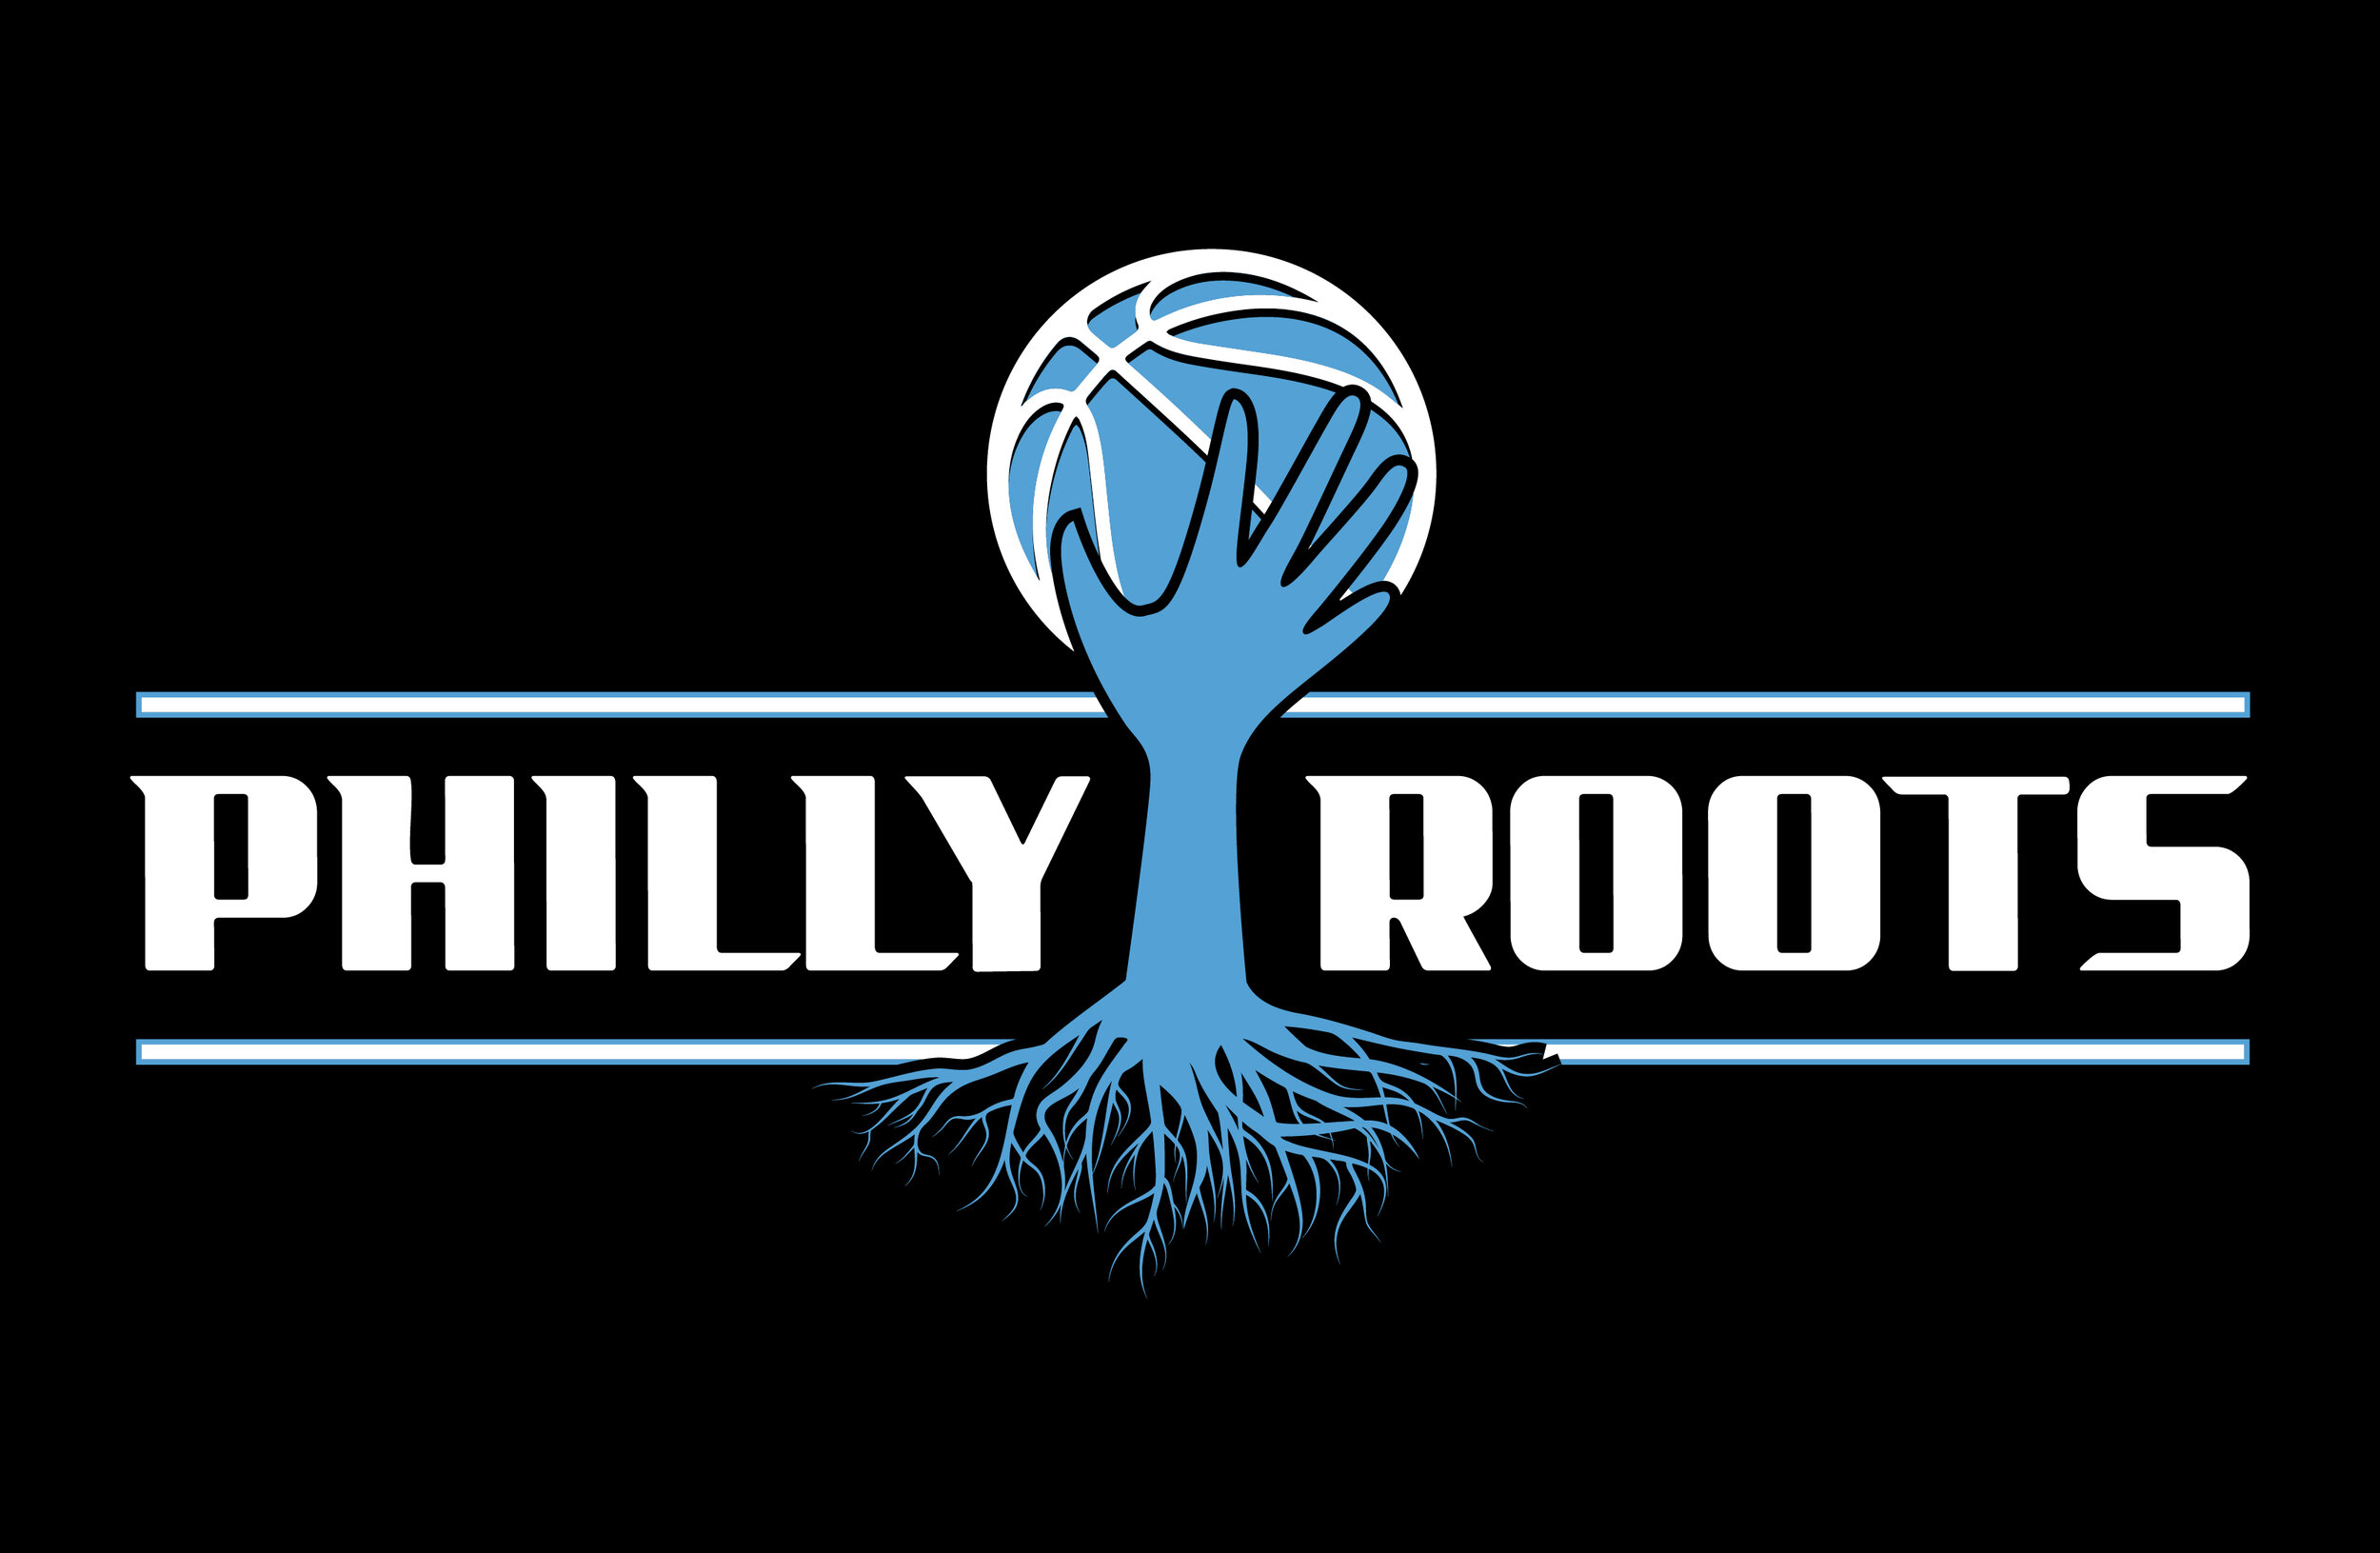 Philly Roots Basketball